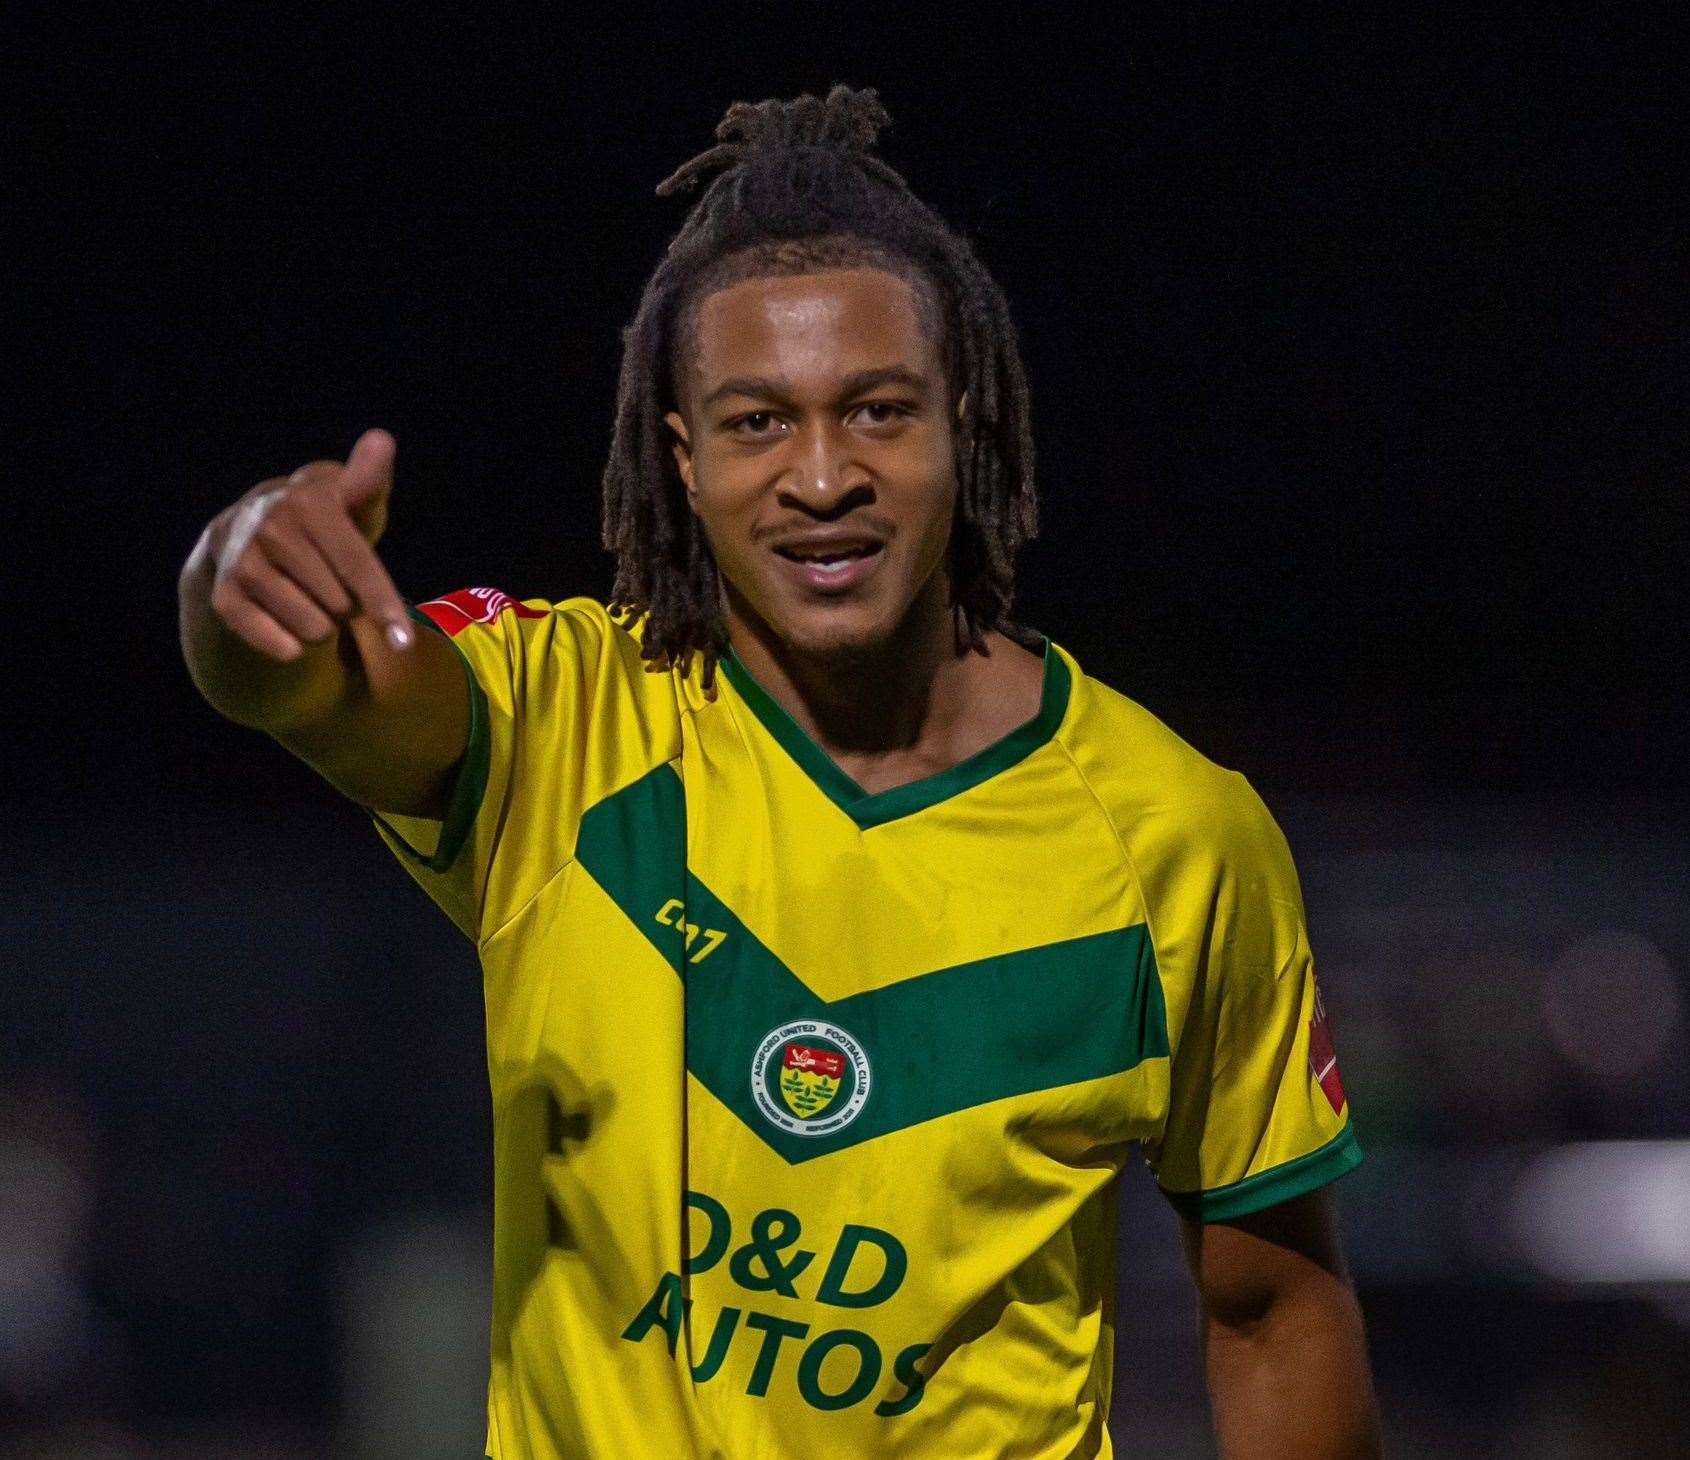 Kymani Thomas celebrates scoring for Ashford in the League Cup at Ramsgate - his first game since recovering from a broken leg while with Herne Bay last season. Picture: Ian Scammell